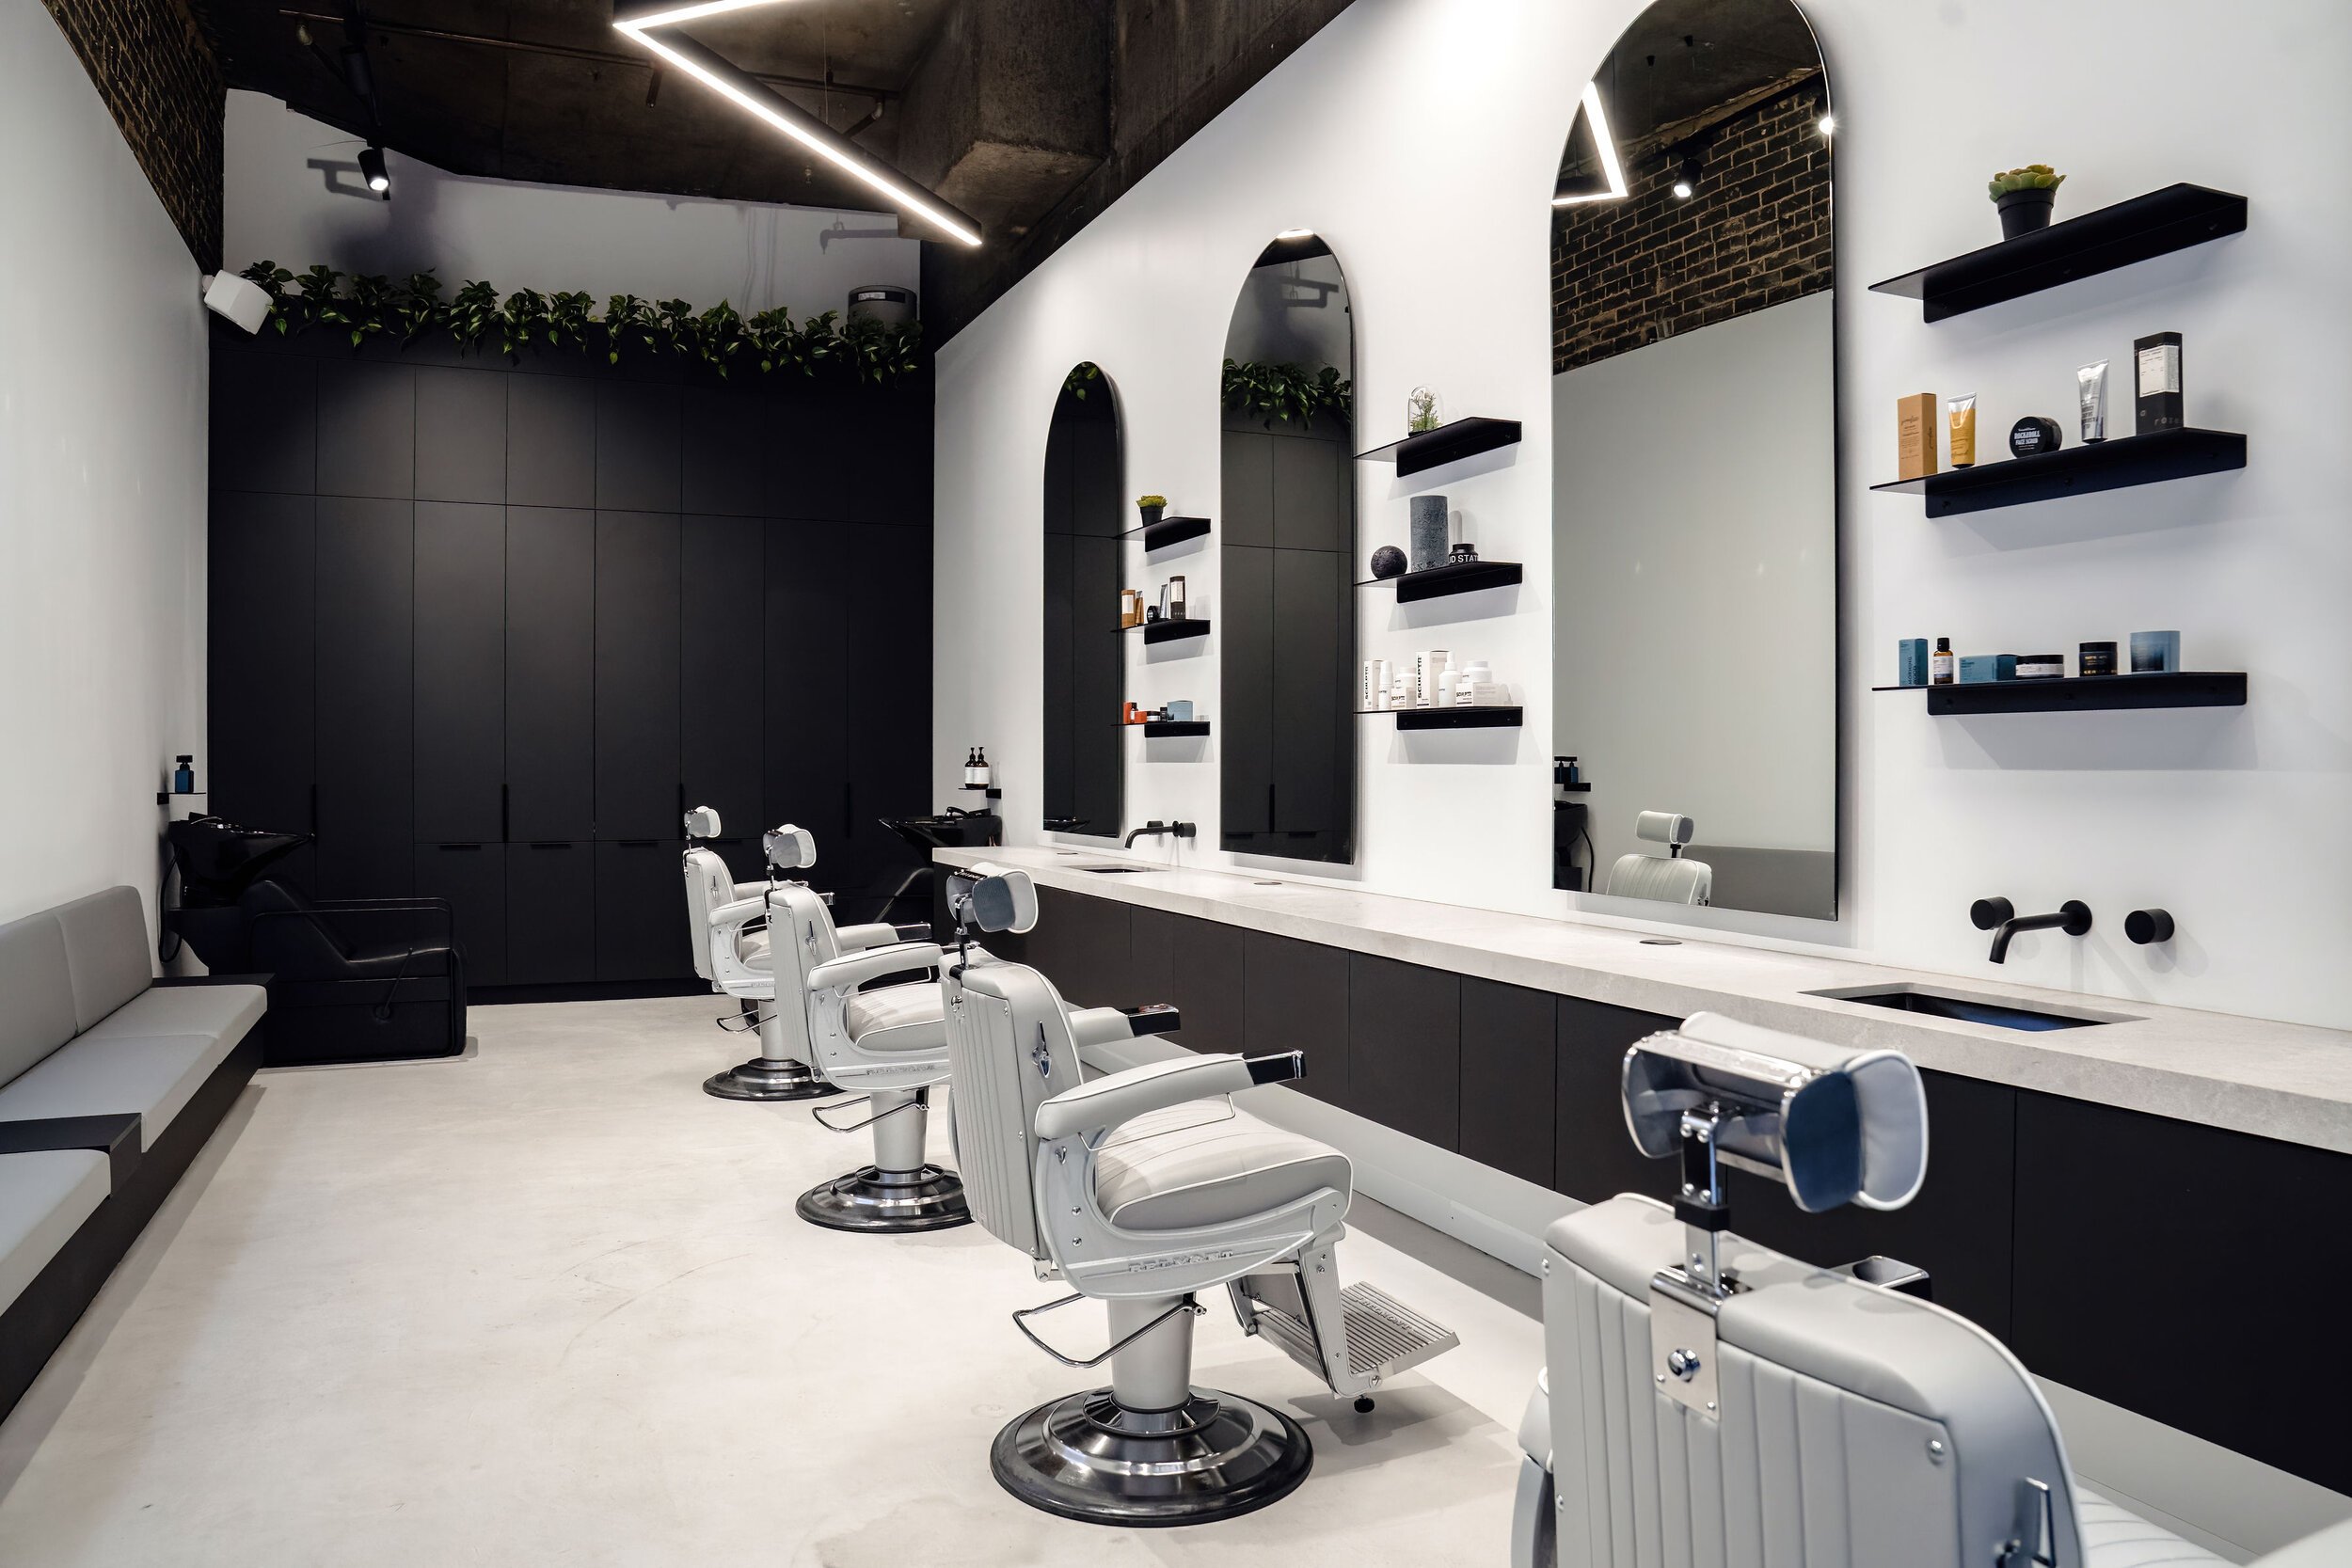 5000 BC is one of the best new barbers in Sydney